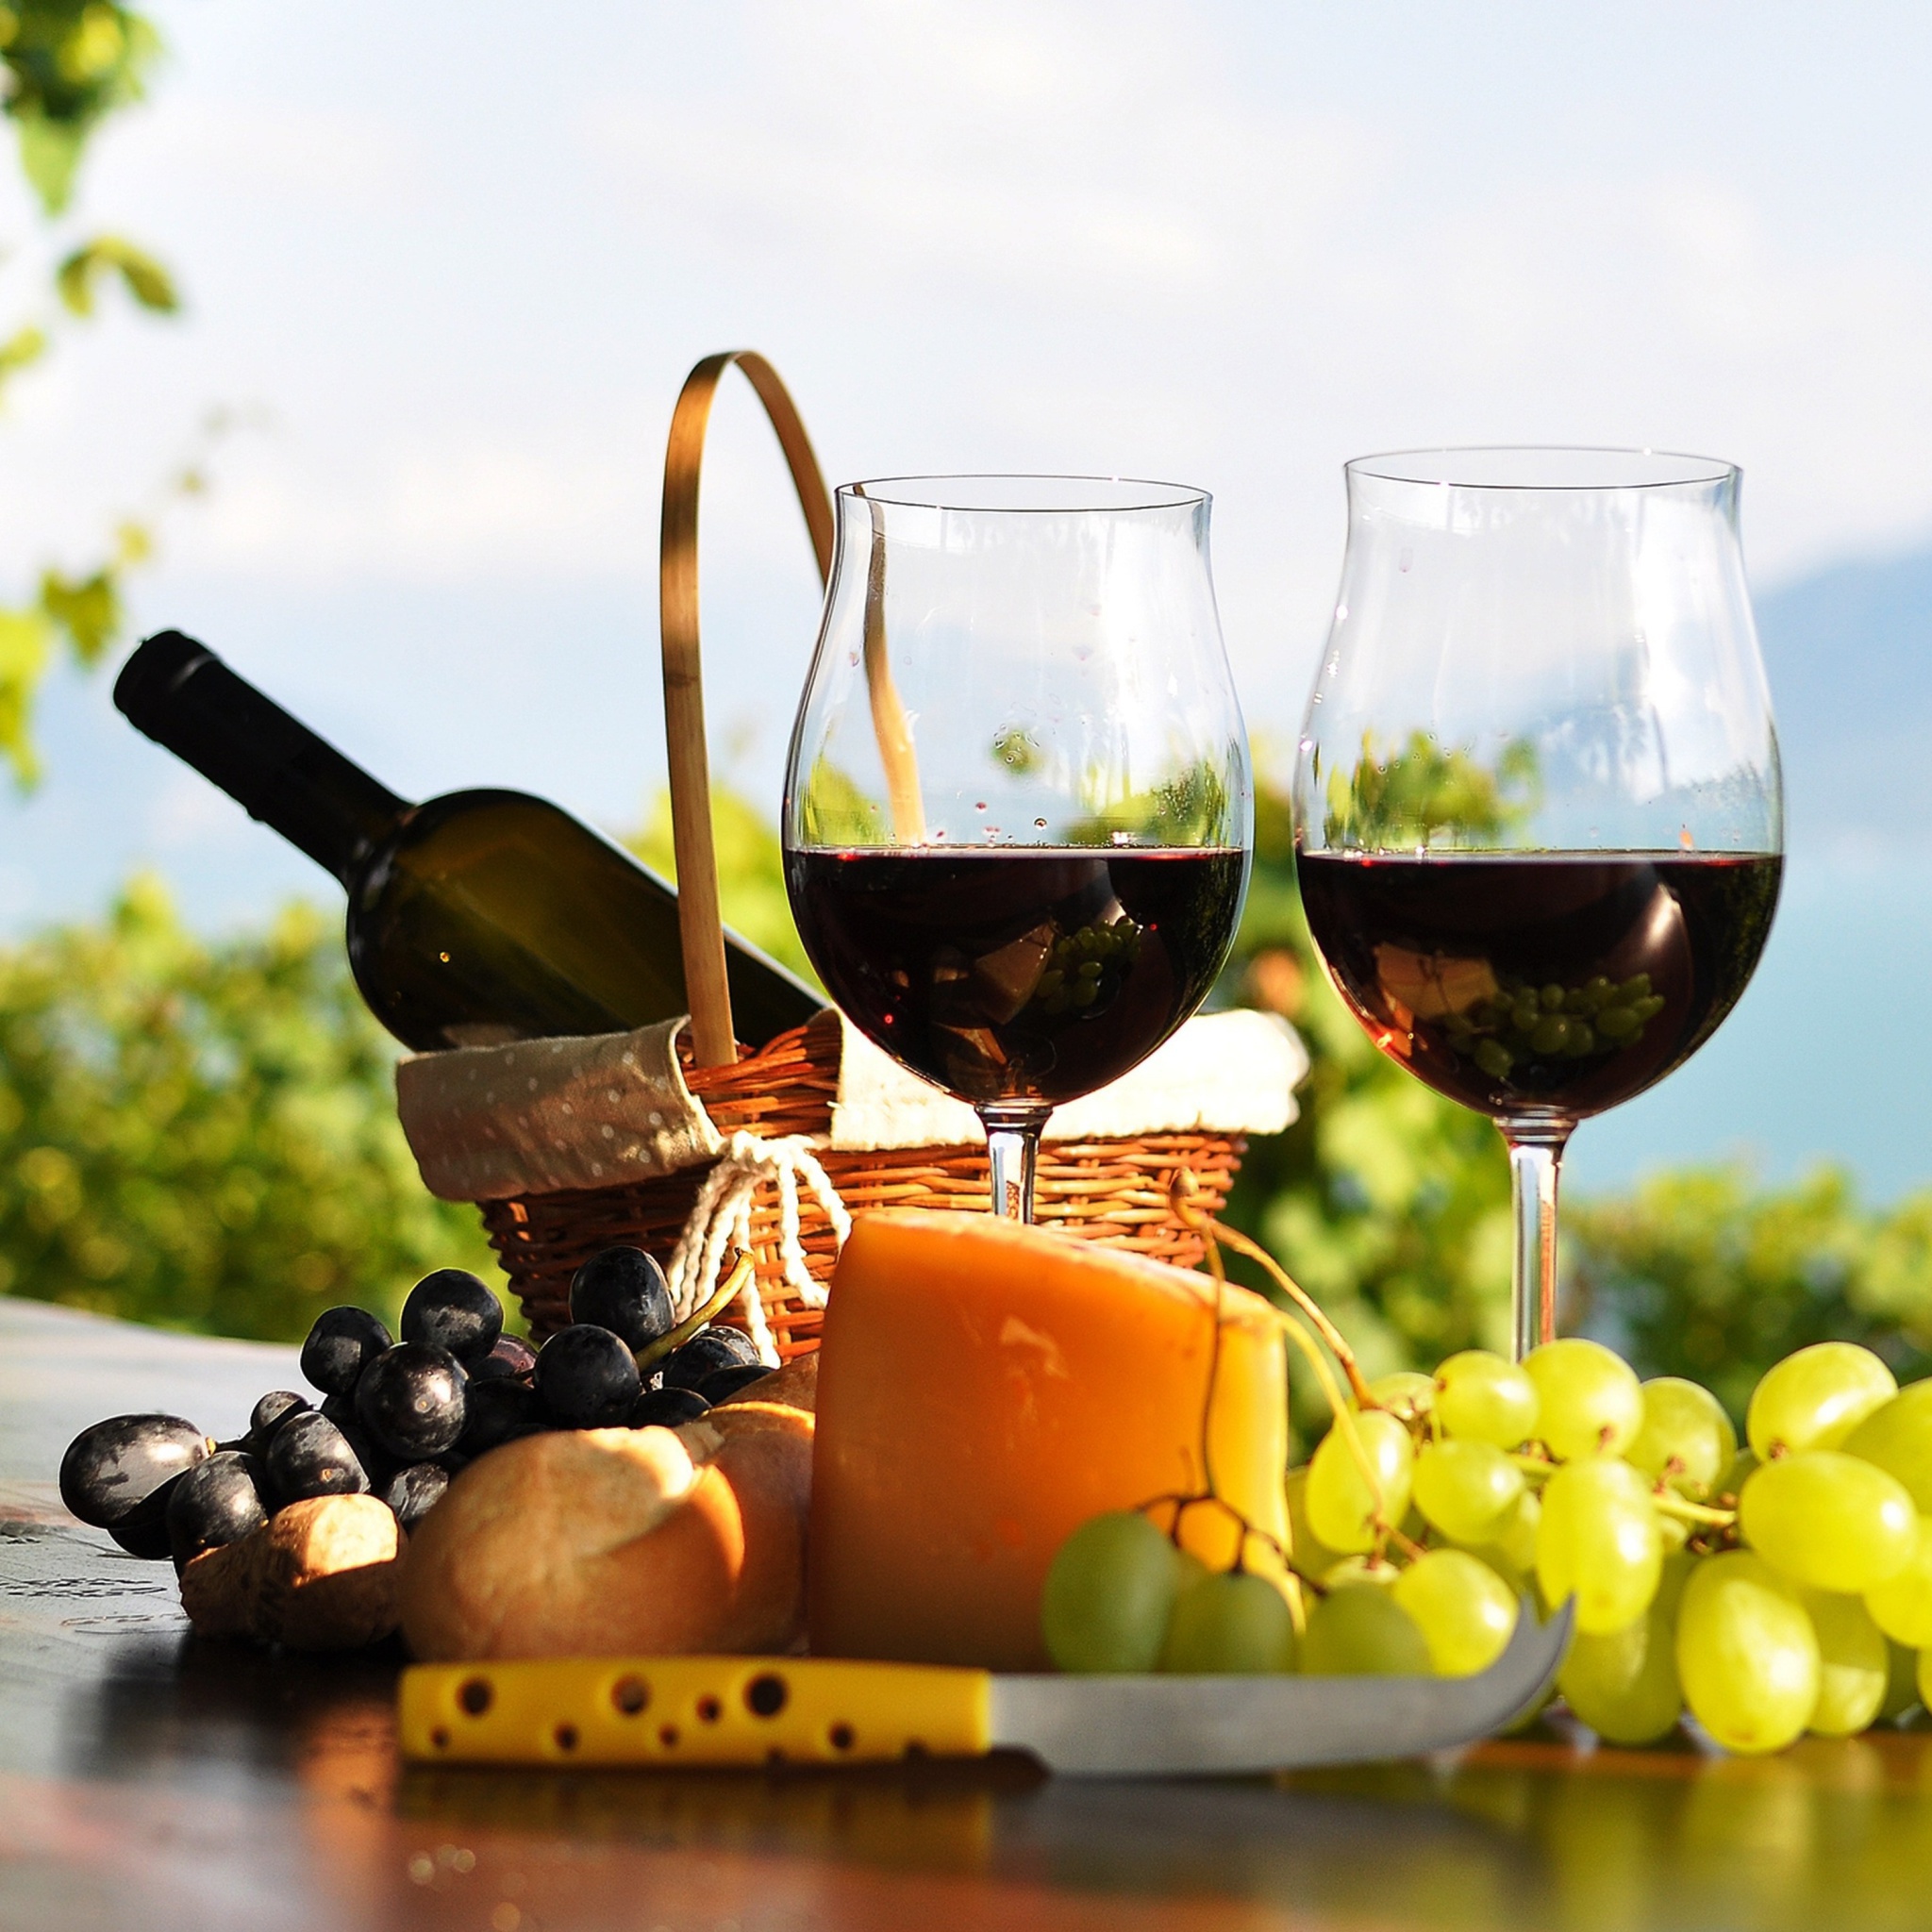 Picnic with wine and grapes screenshot #1 2048x2048